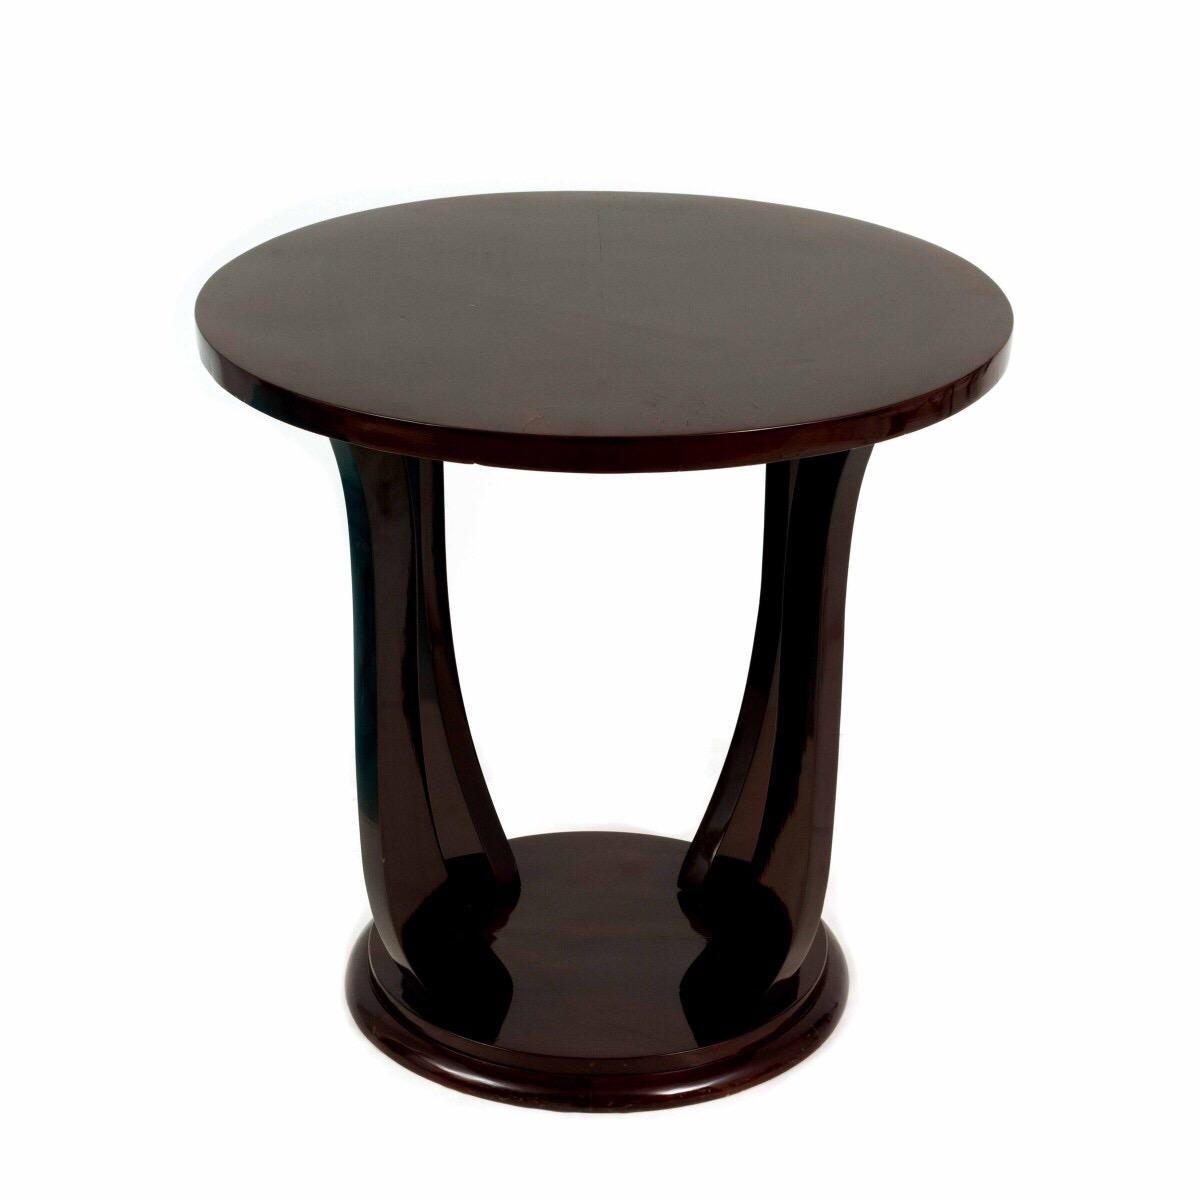 An Art Deco highly polished Palisander occasional table with round top and four elegantly curved legs resting on a round base. France, 1935.

Provenance: Wooster Gallery French, circa 1935 

Dimensions: 25.5 inches W × 24.5 inches H.